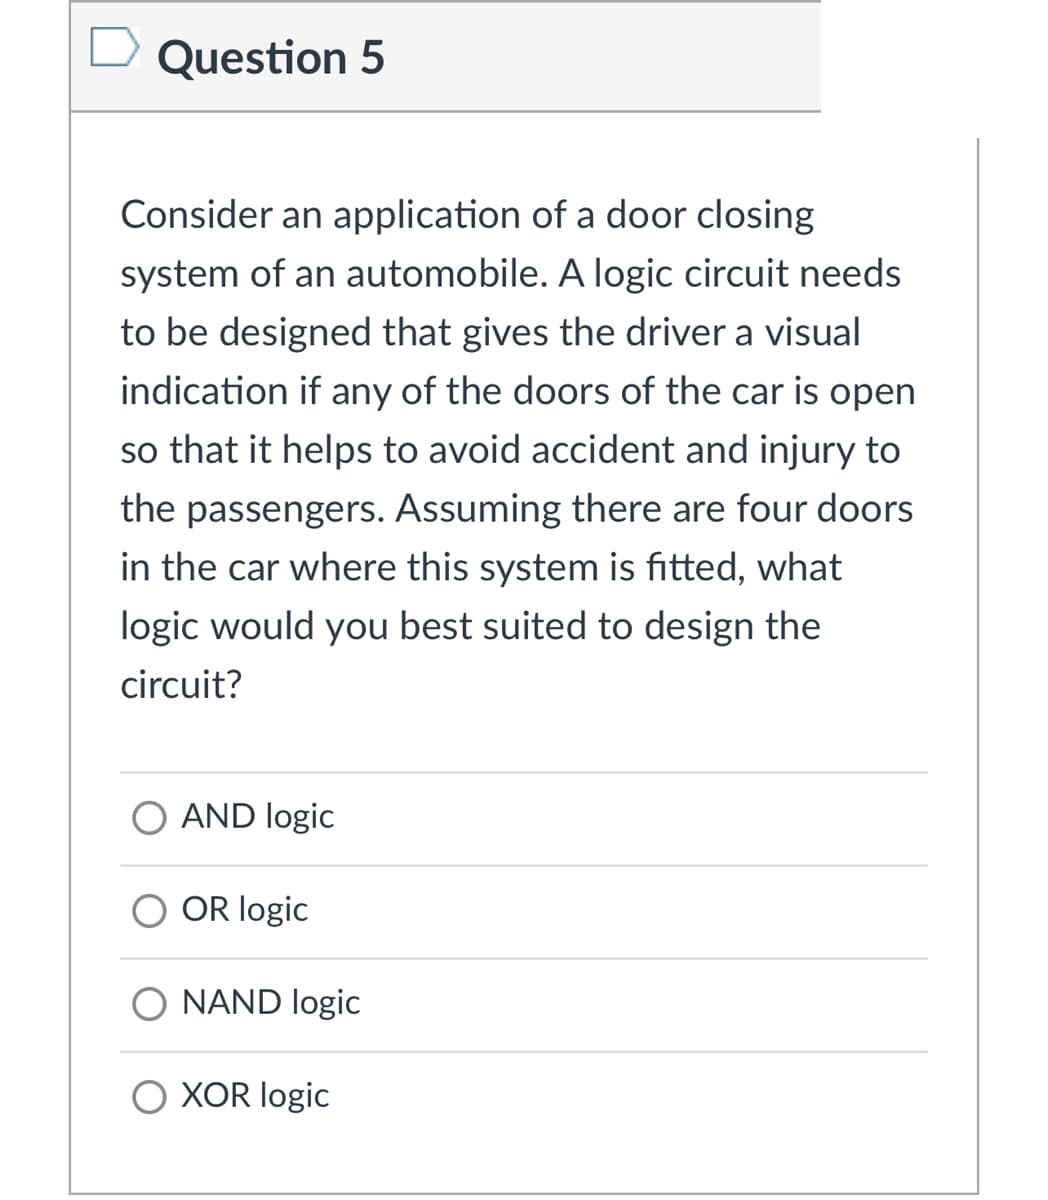 Question 5
Consider an application of a door closing
system of an automobile. A logic circuit needs
to be designed that gives the driver a visual
indication if any of the doors of the car is open
so that it helps to avoid accident and injury to
the passengers. Assuming there are four doors
in the car where this system is fitted, what
logic would you best suited to design the
circuit?
O AND logic
O OR logic
NAND logic
XOR logic
